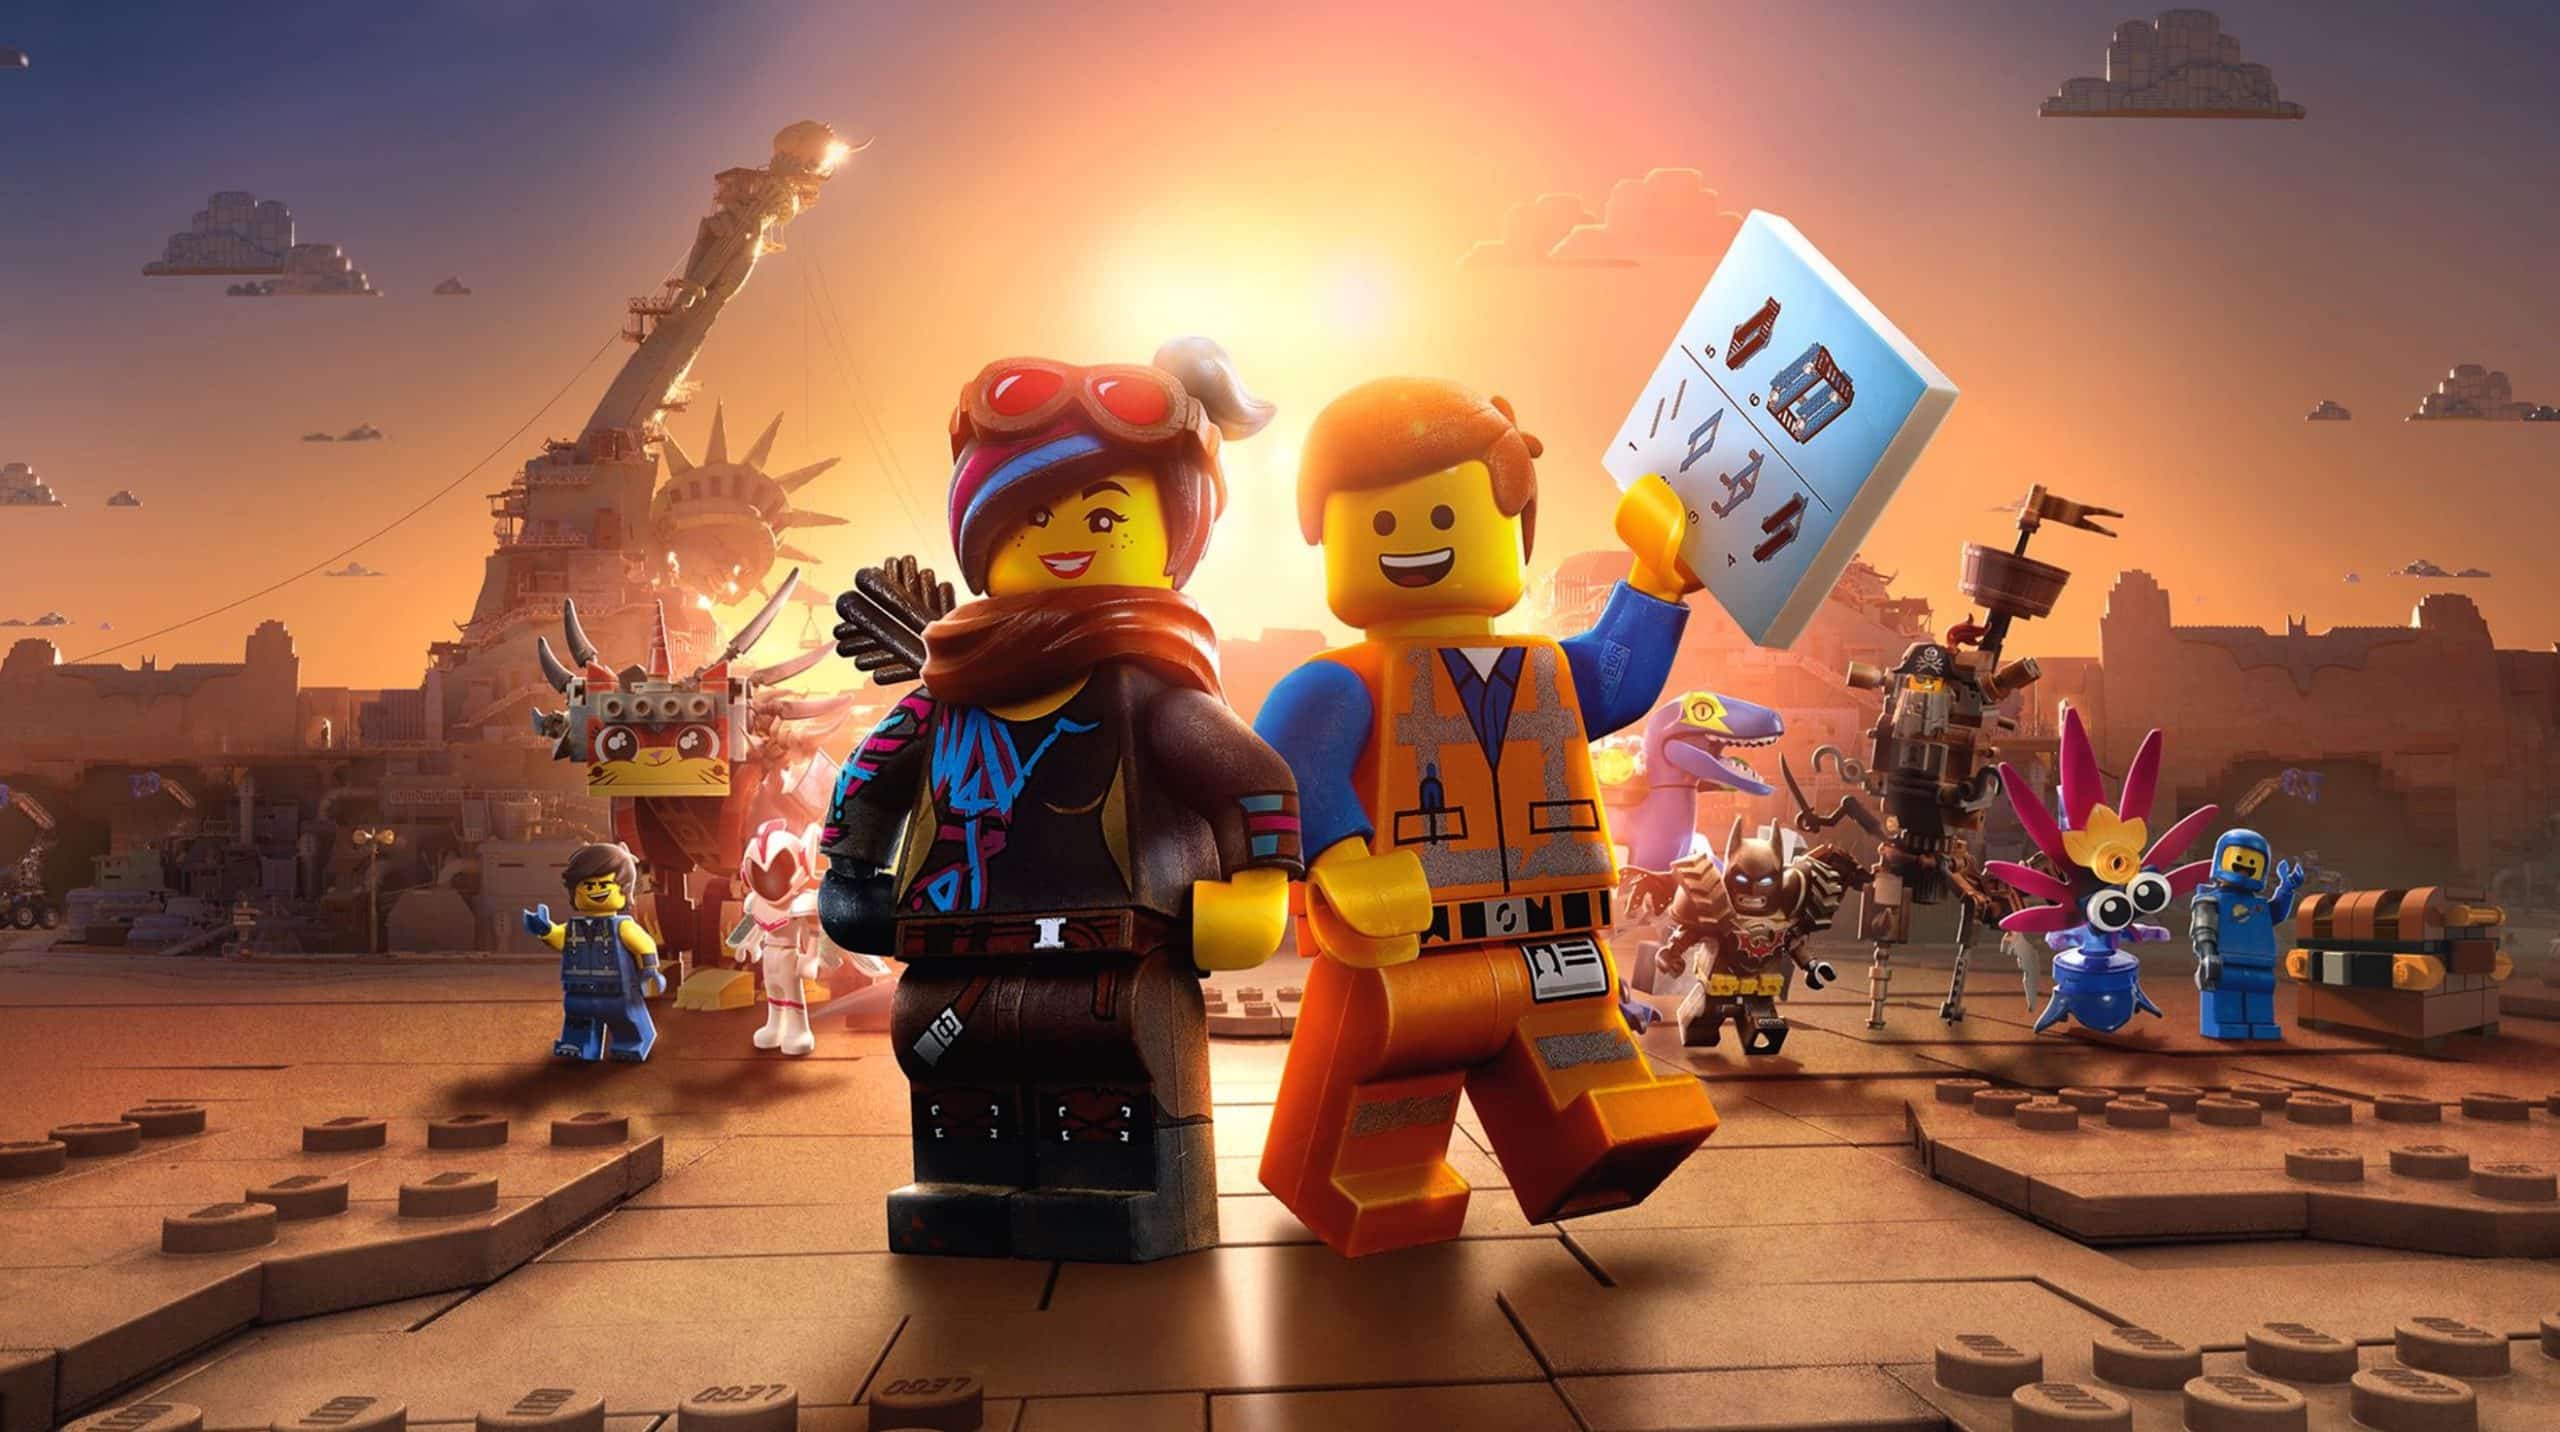 Personnages du film d'animation The Lego Movie